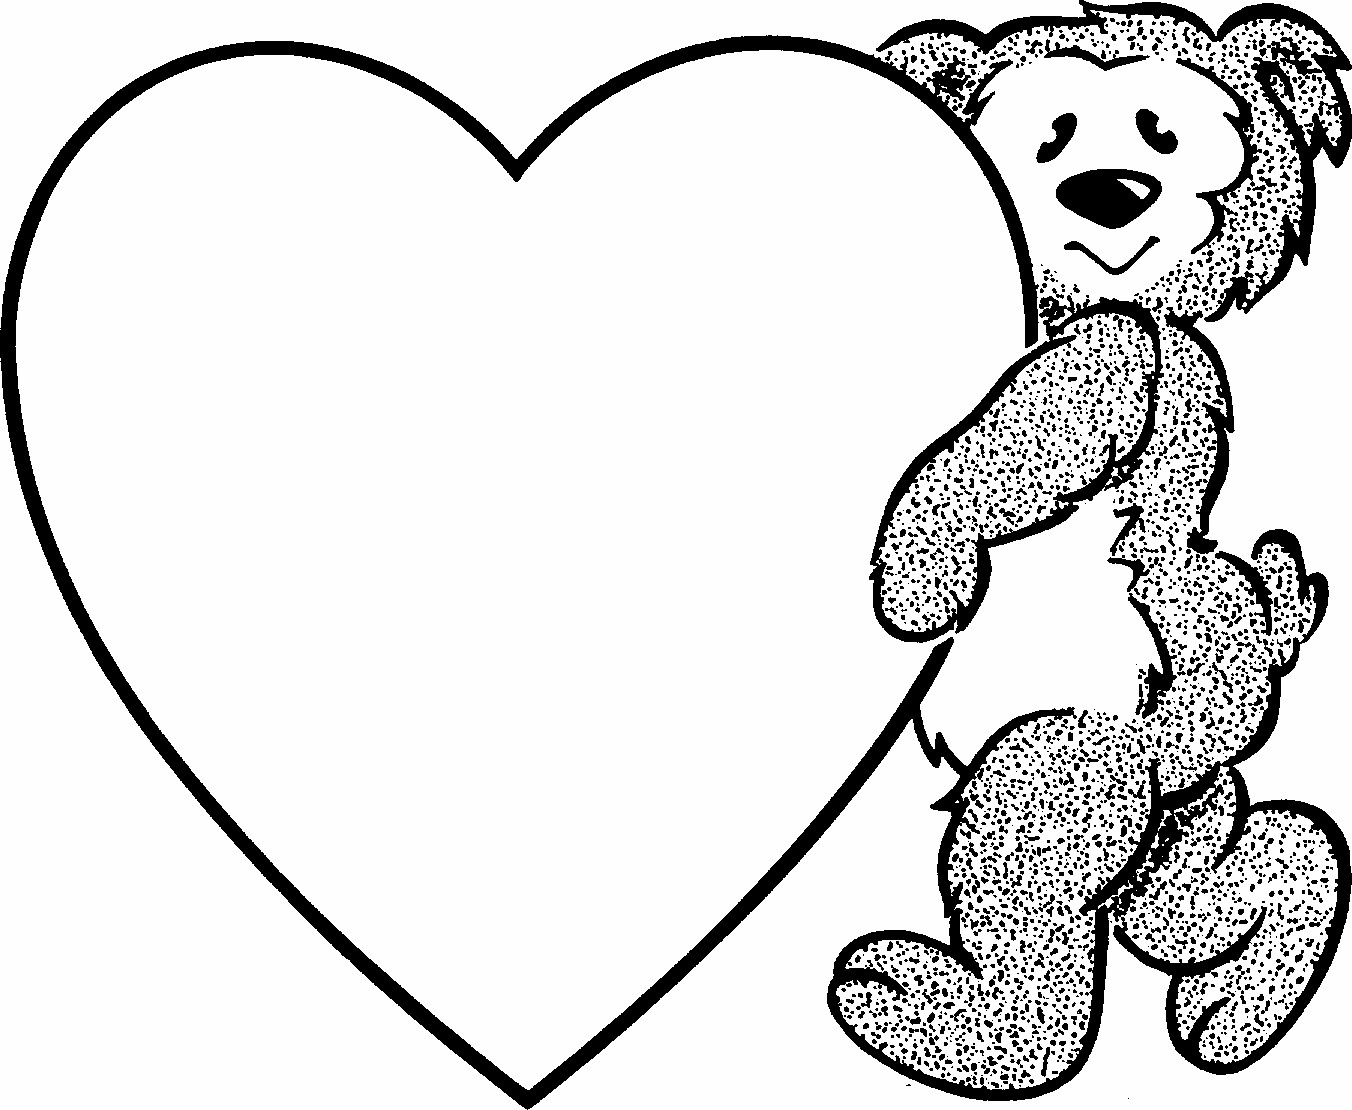 Valentines Coloring Sheets For Kids
 Free Printable Valentine Coloring Pages For Kids